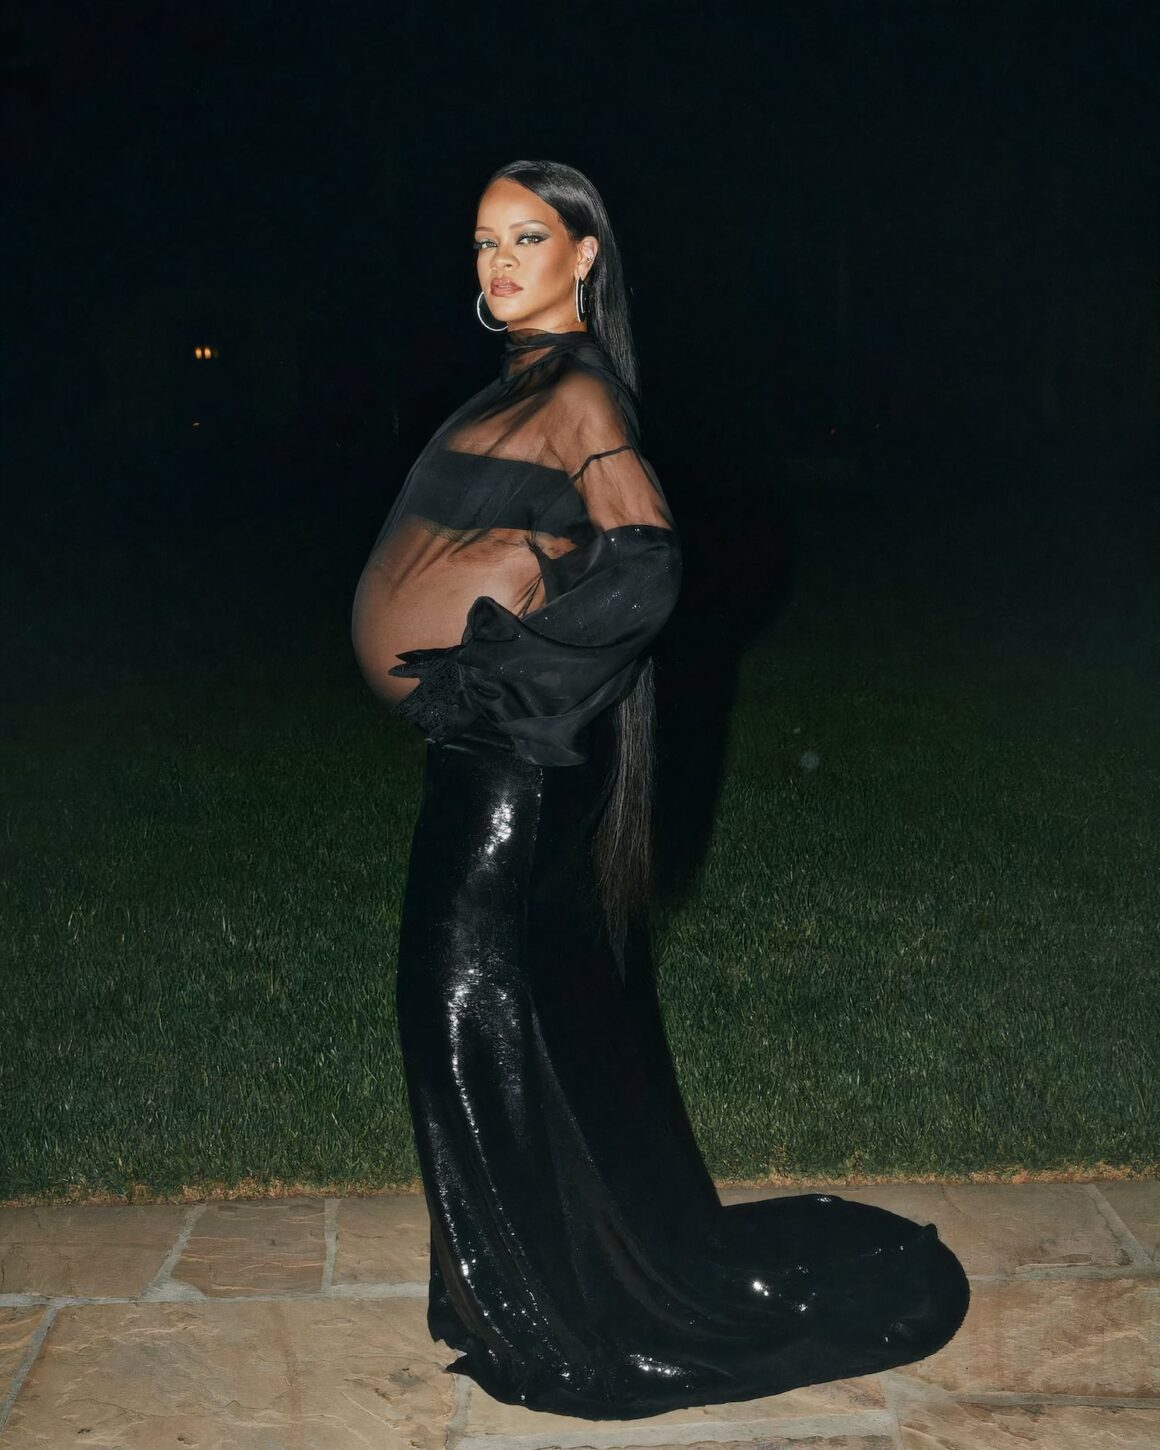 Rihanna Bares Baby Bump at Beyonce and JAY-Z's Oscars 2022 Afterparty